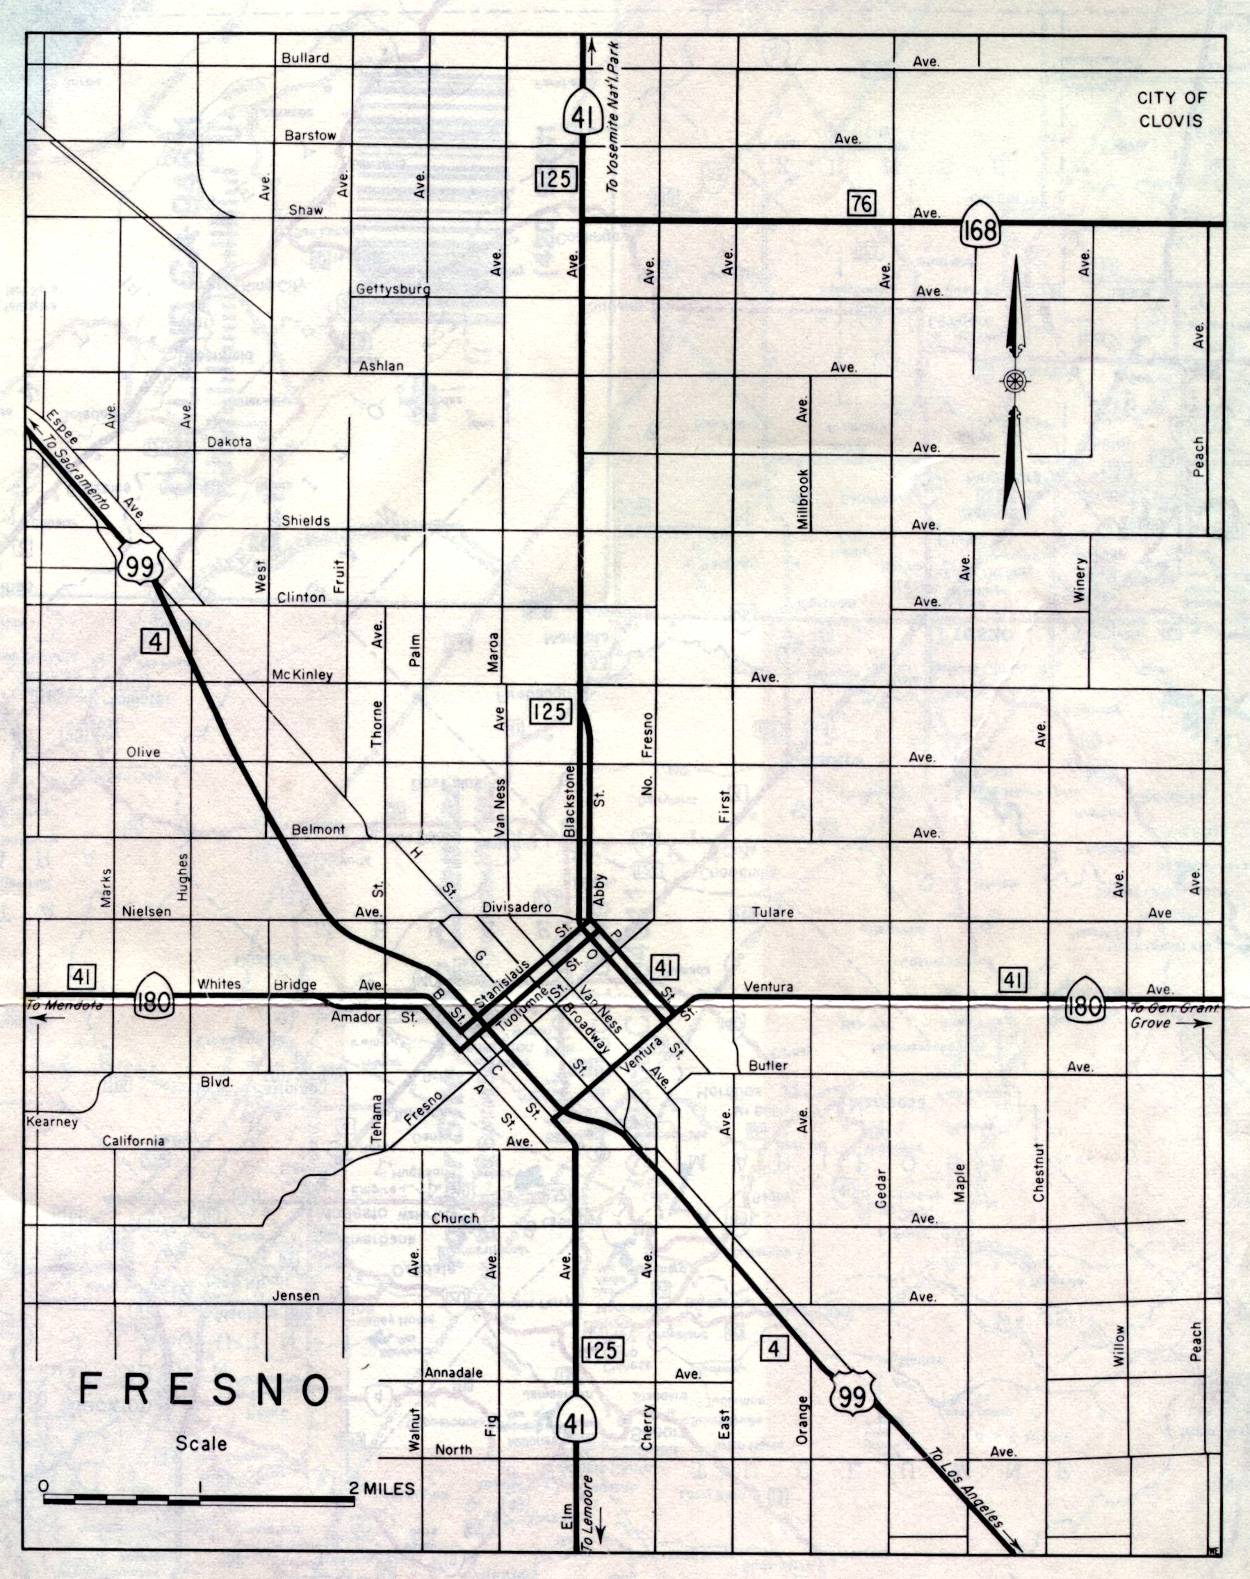 Detail map for Fresno on the 1961 California official highway map